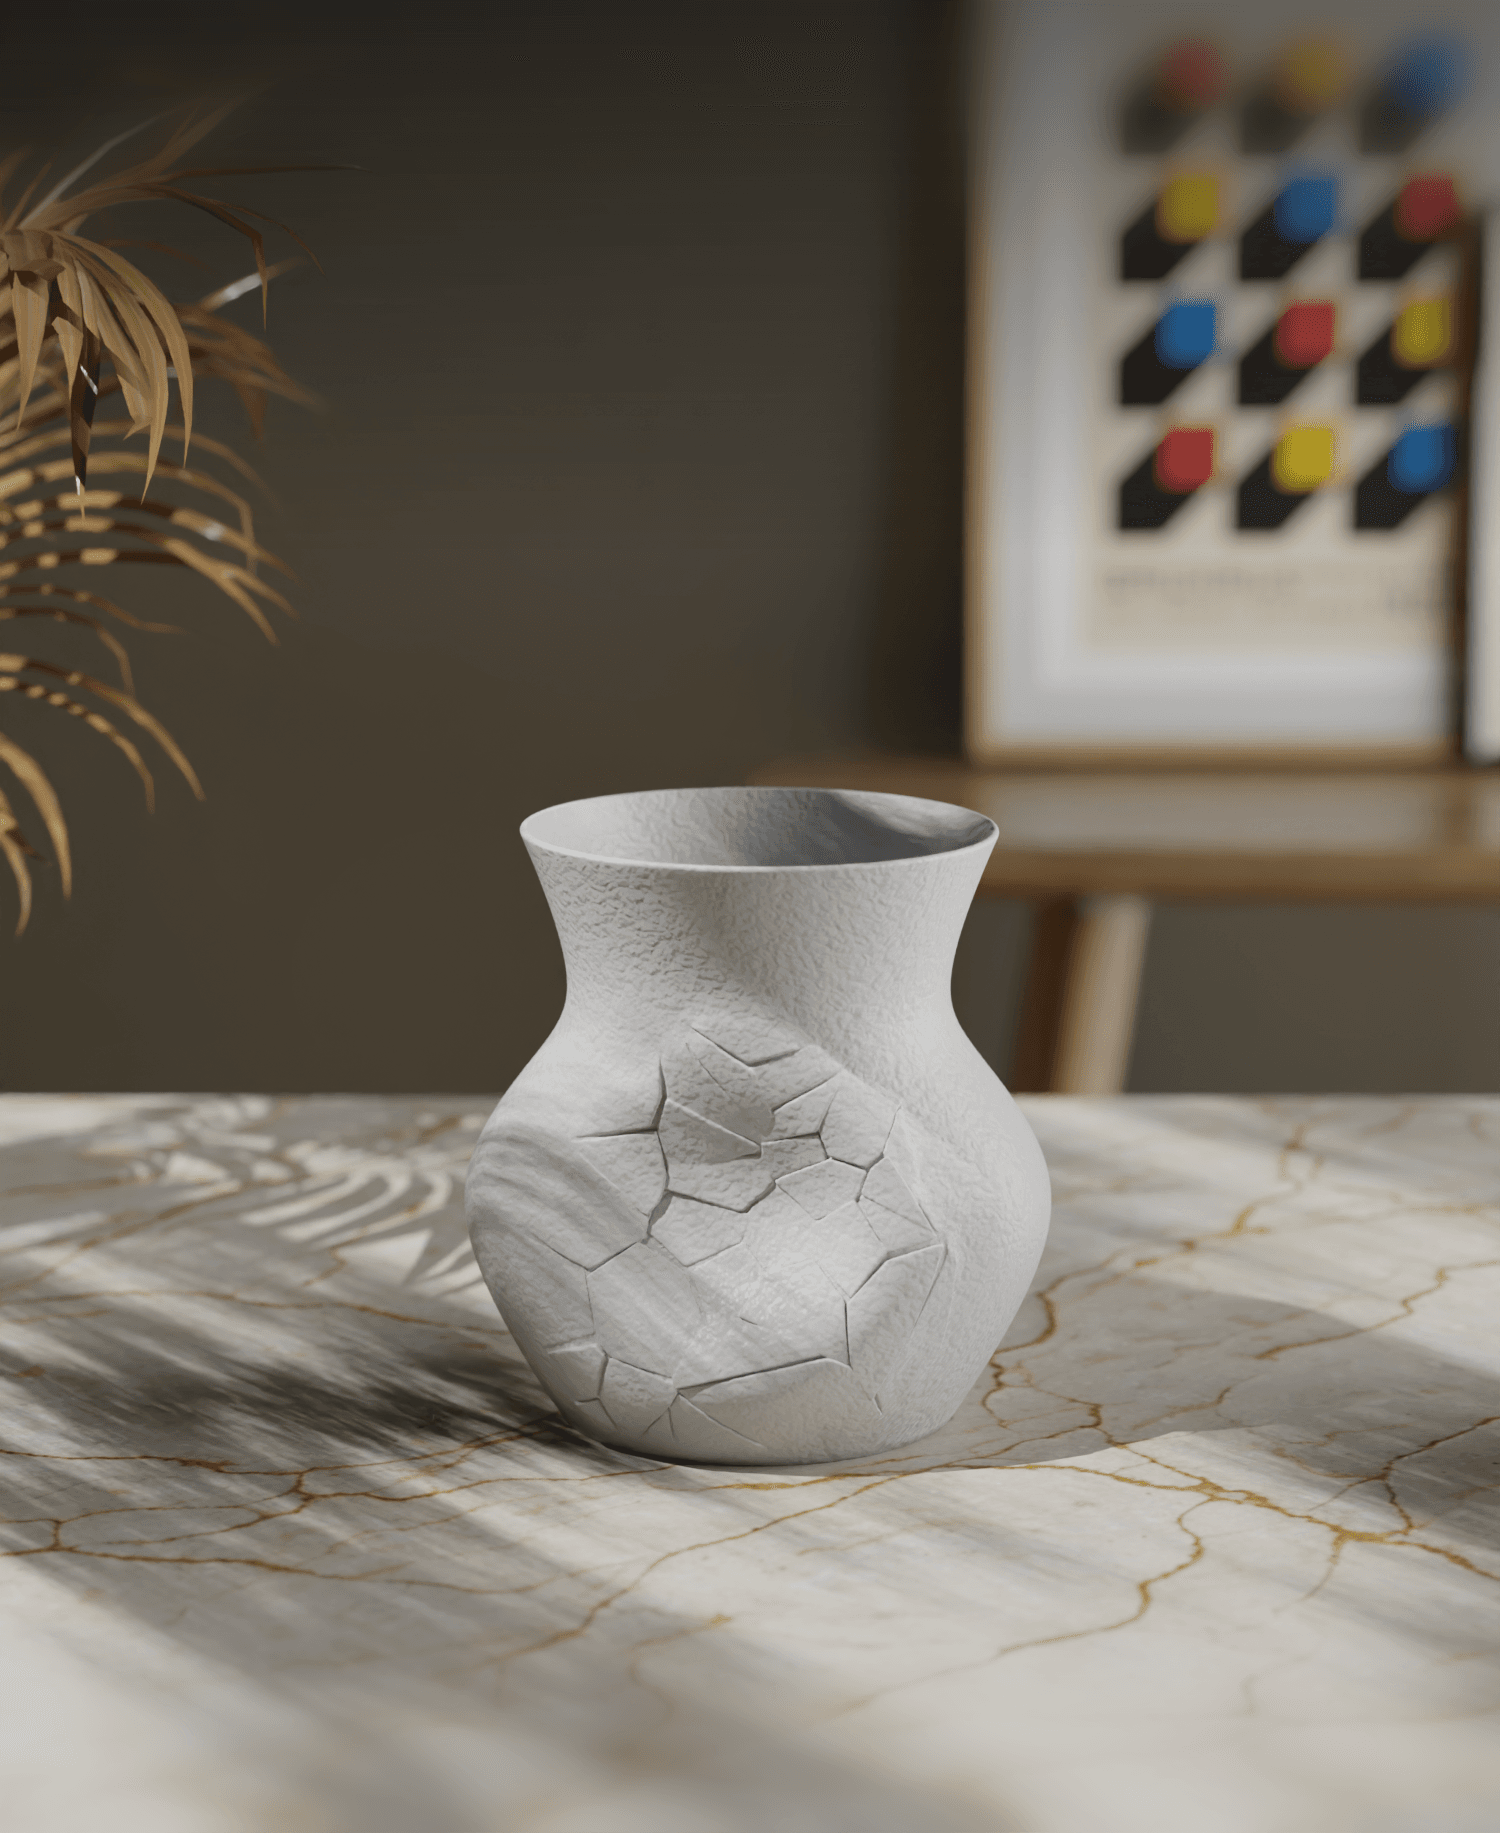 Shattered Pottery: An Artful Expression of Resilience 3d model